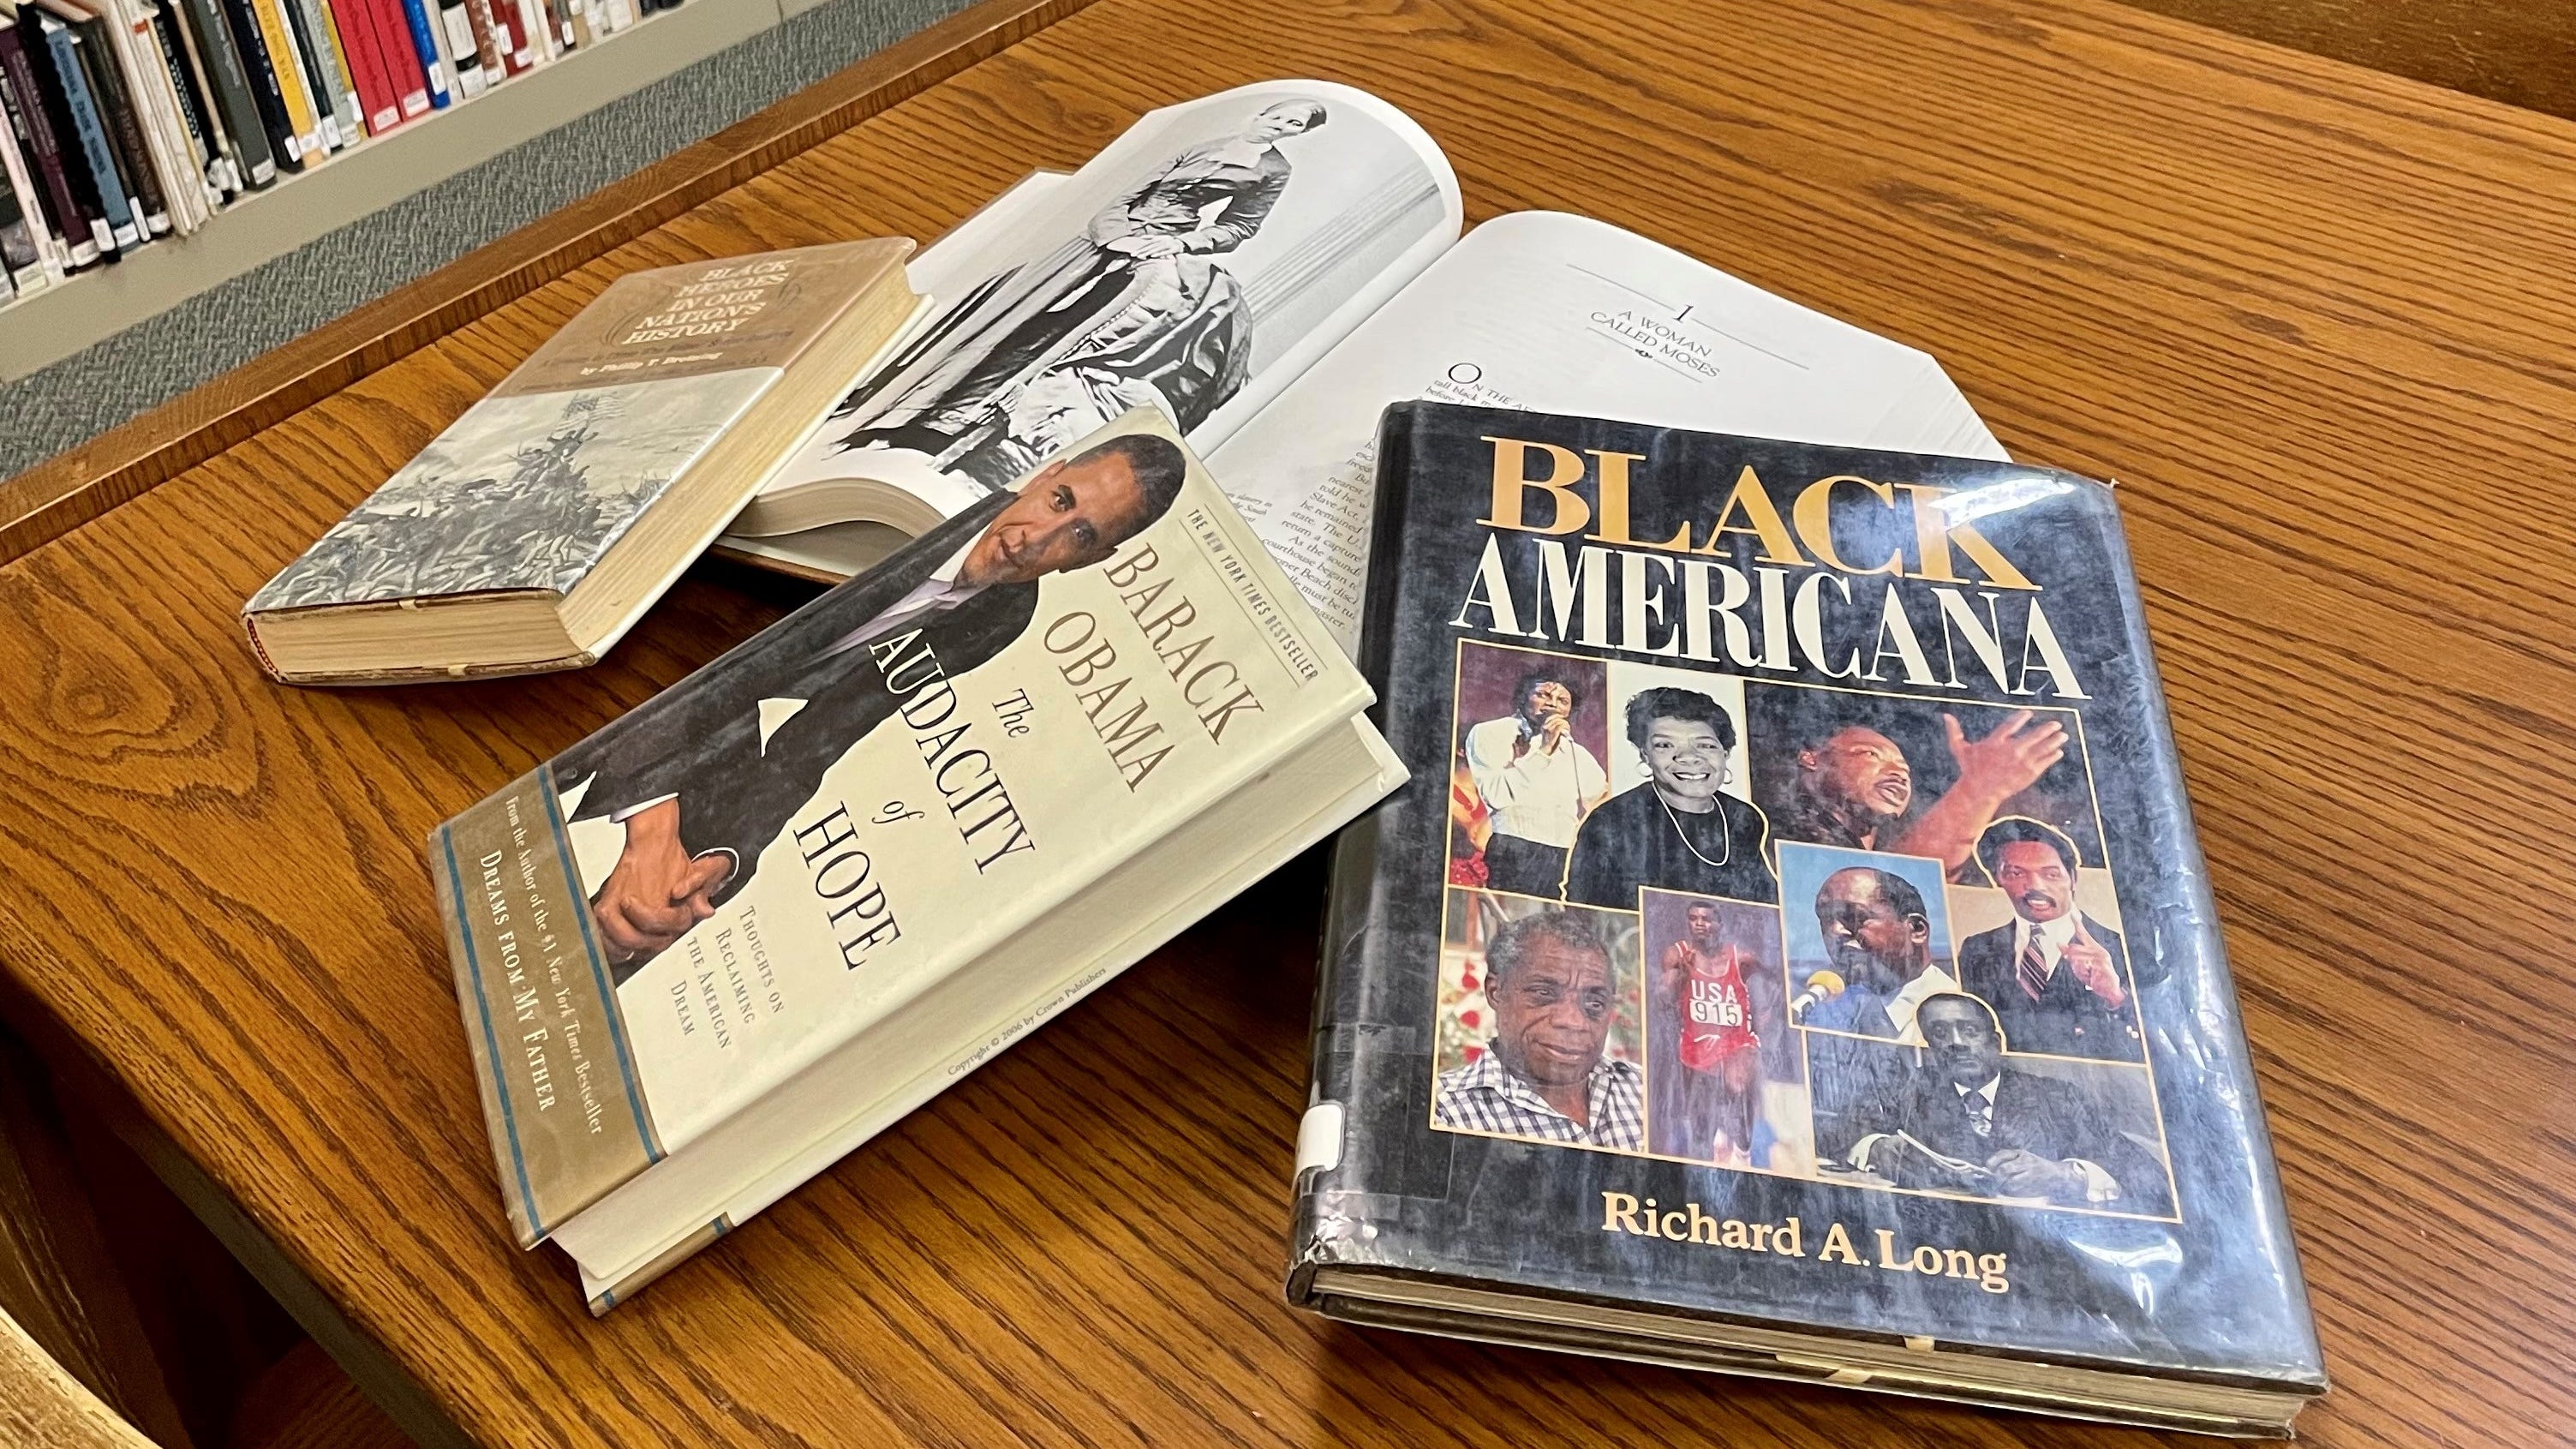 Black History Month: What books to read, according to librarians